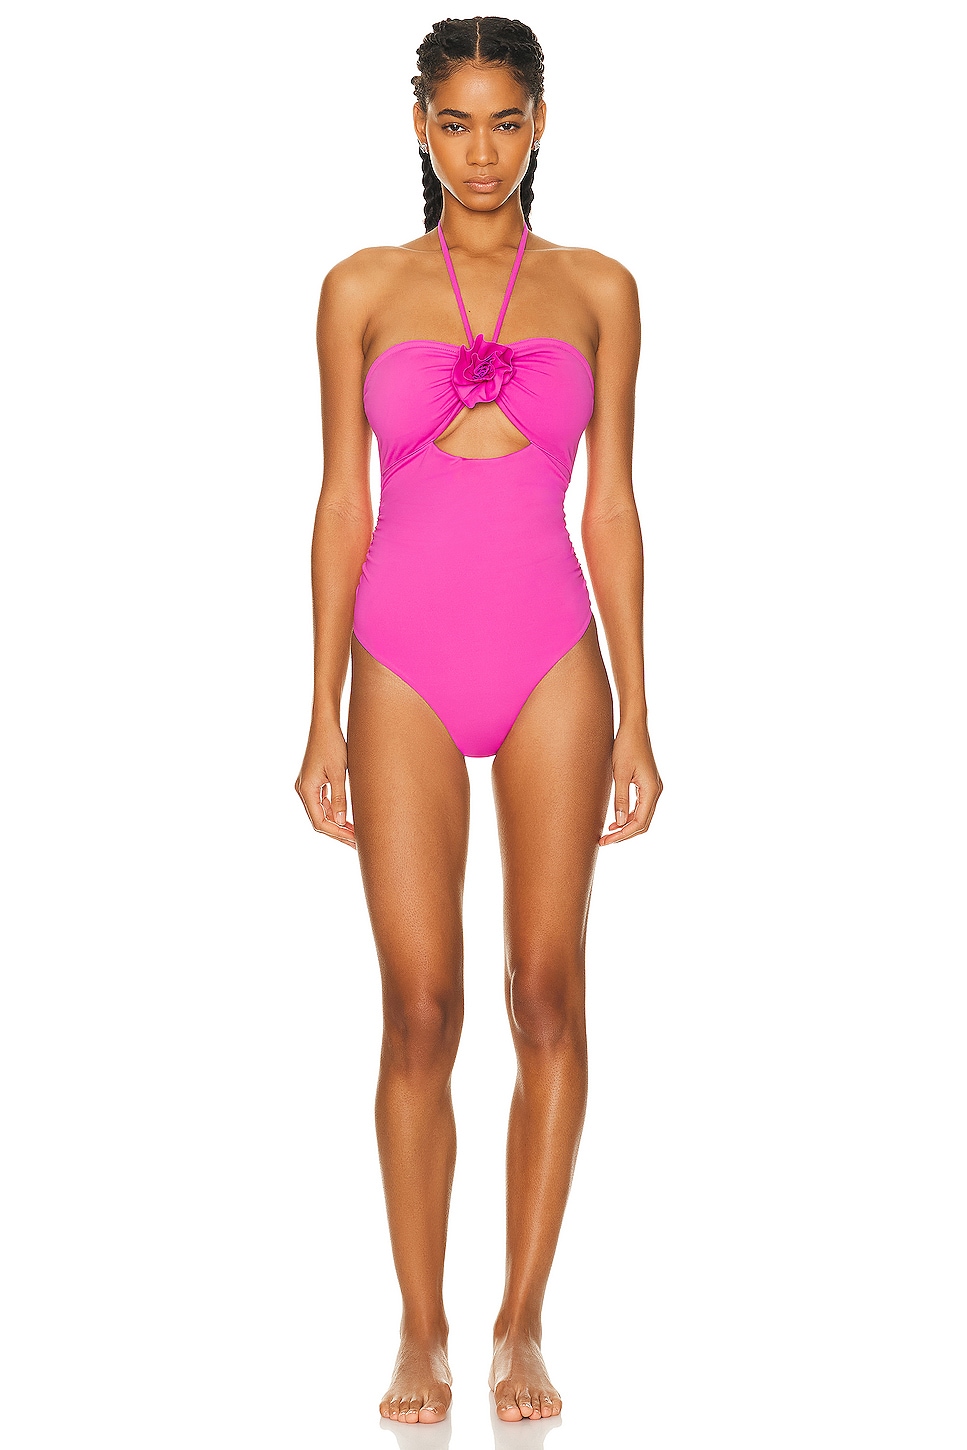 Image 1 of LoveShackFancy Didi One Piece Swimsuit in Party Punch